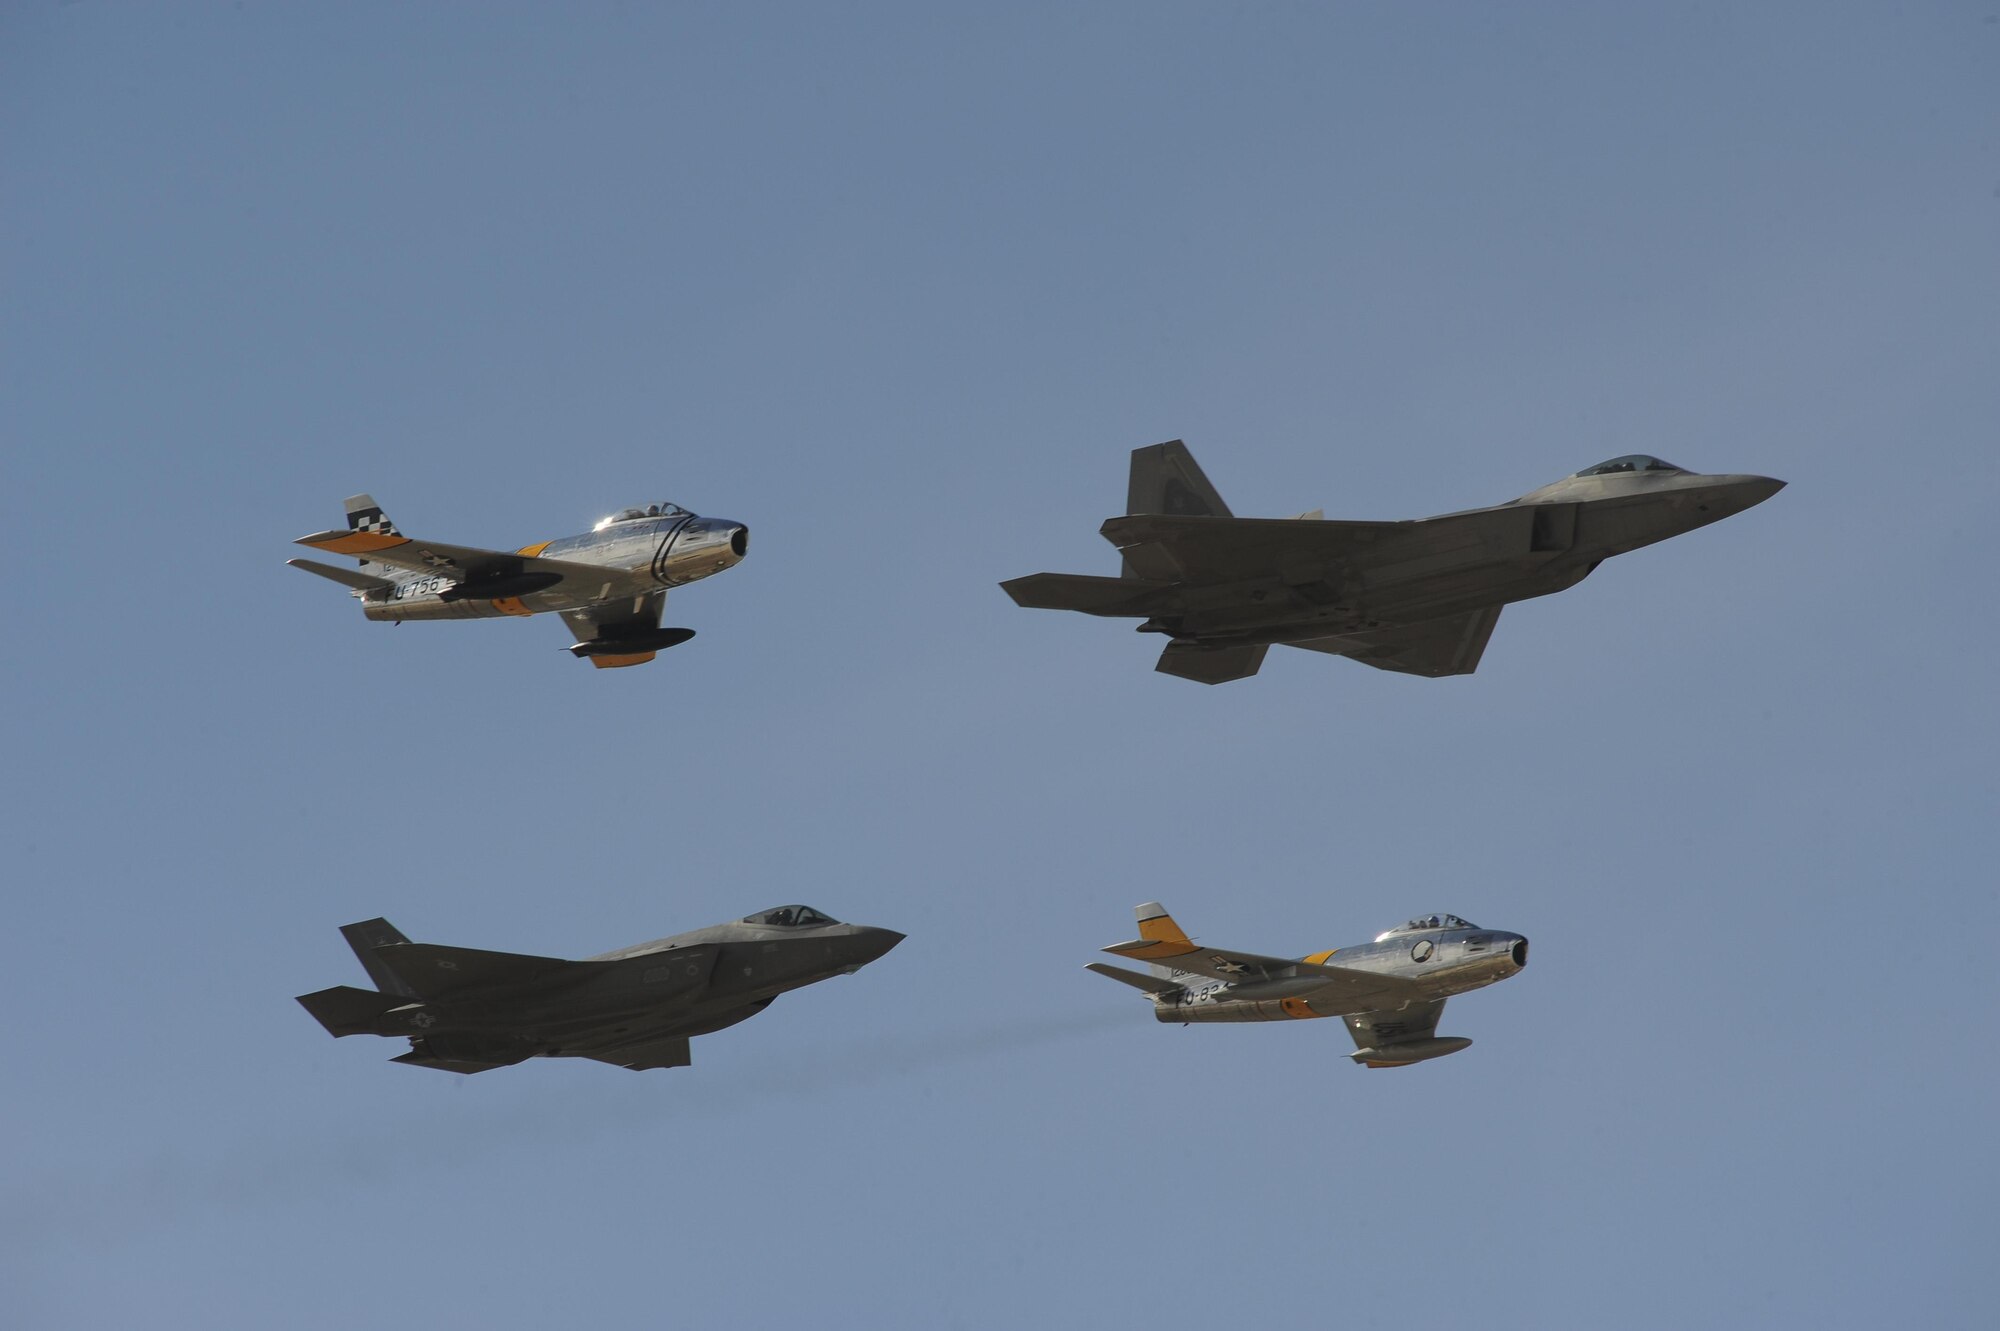 A U.S. Air Force F-35 Lightning II and an F-22 Raptor fly in formation with two F-86 Sabres during the 2017 Heritage Flight Training and Certification Course at Davis-Monthan Air Force Base, Ariz., Feb. 12, 2017. During the course, aircrews practice ground and flight training to enable civilian pilots of historic military aircraft and U.S. Air Force pilots of current fighter aircraft to fly safely in formations together. (U.S. Air Force photo by Senior Airman Ashley N. Steffen)